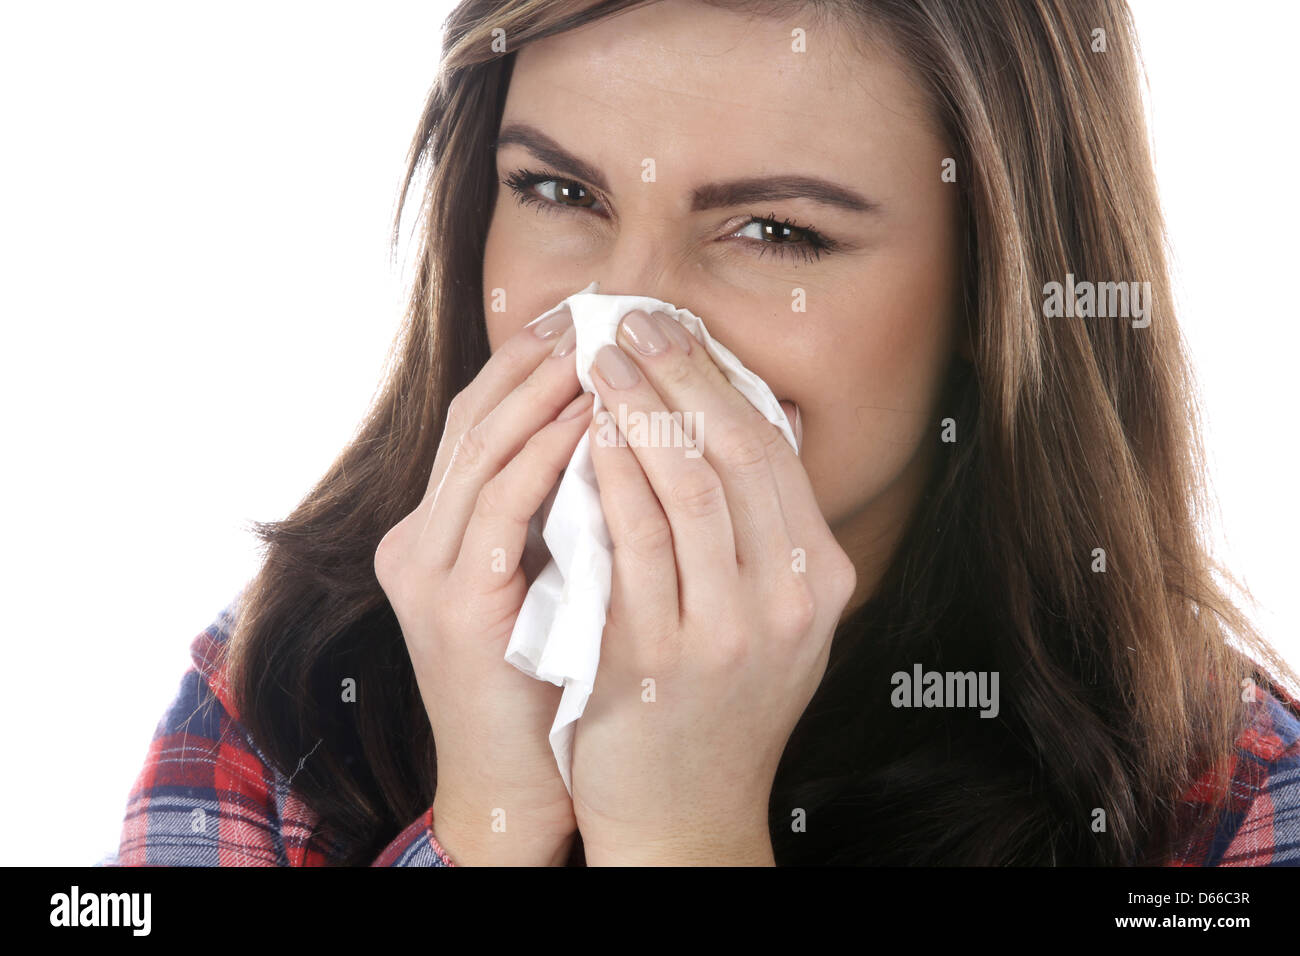 Young Woman With A Temperature And Cough, Showing Symptoms Of Coronavirus Or Covid-19 Contagious Respiratory Infection, Isolated On White Stock Photo